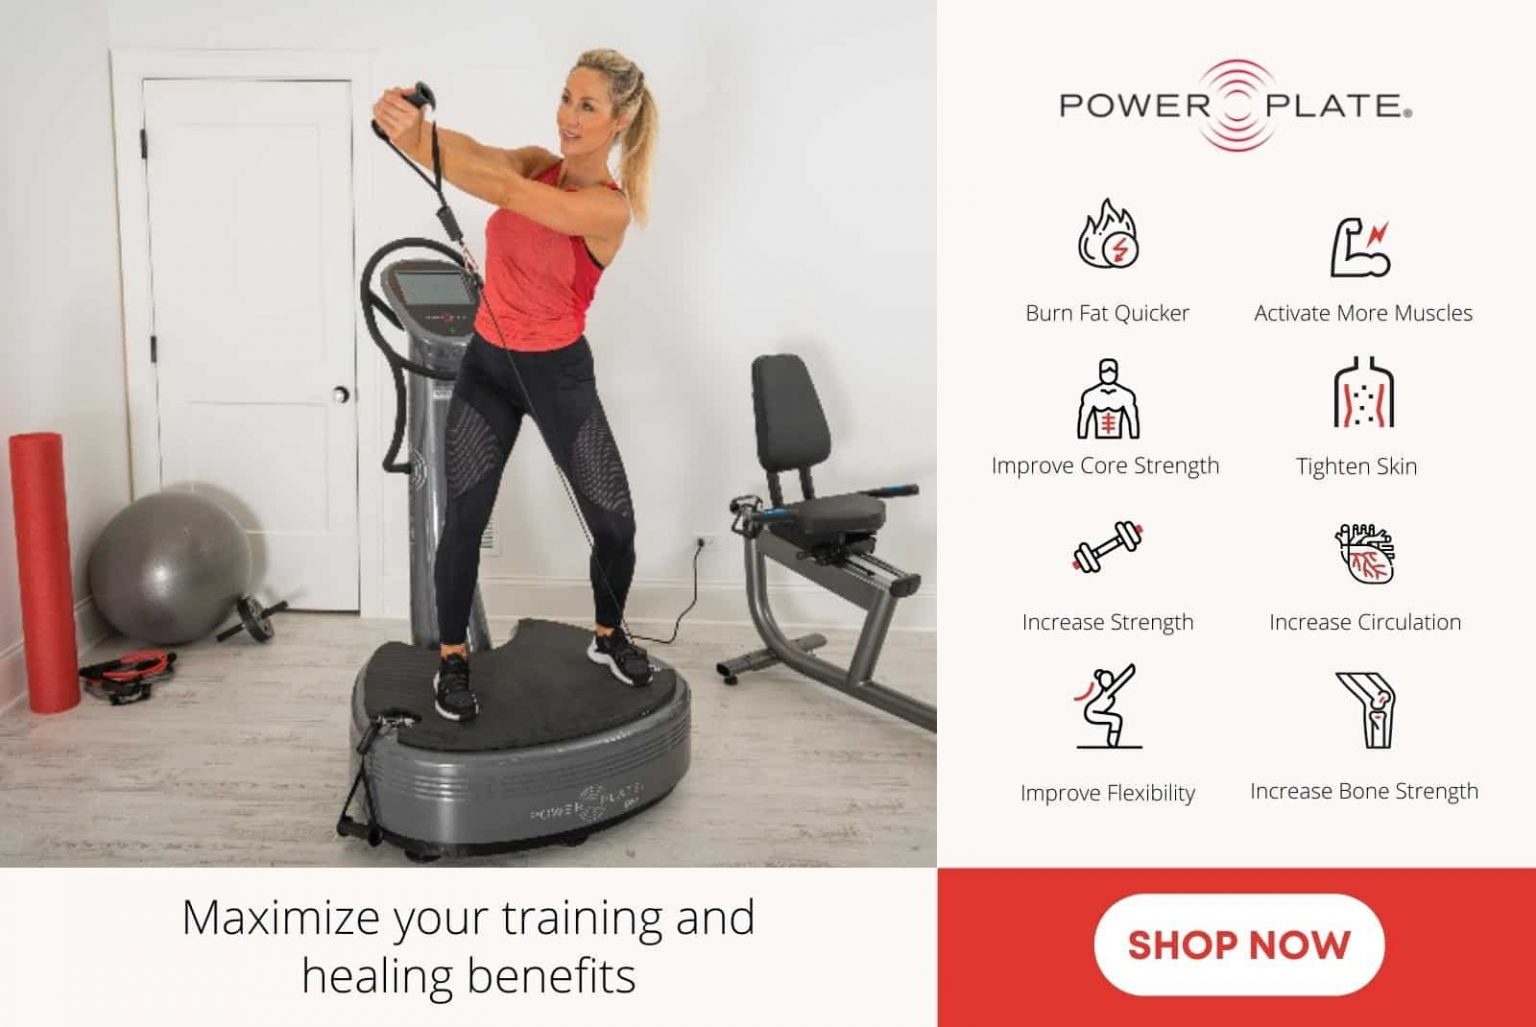 Maximize your training and health benefits with the Power Plate Pro7